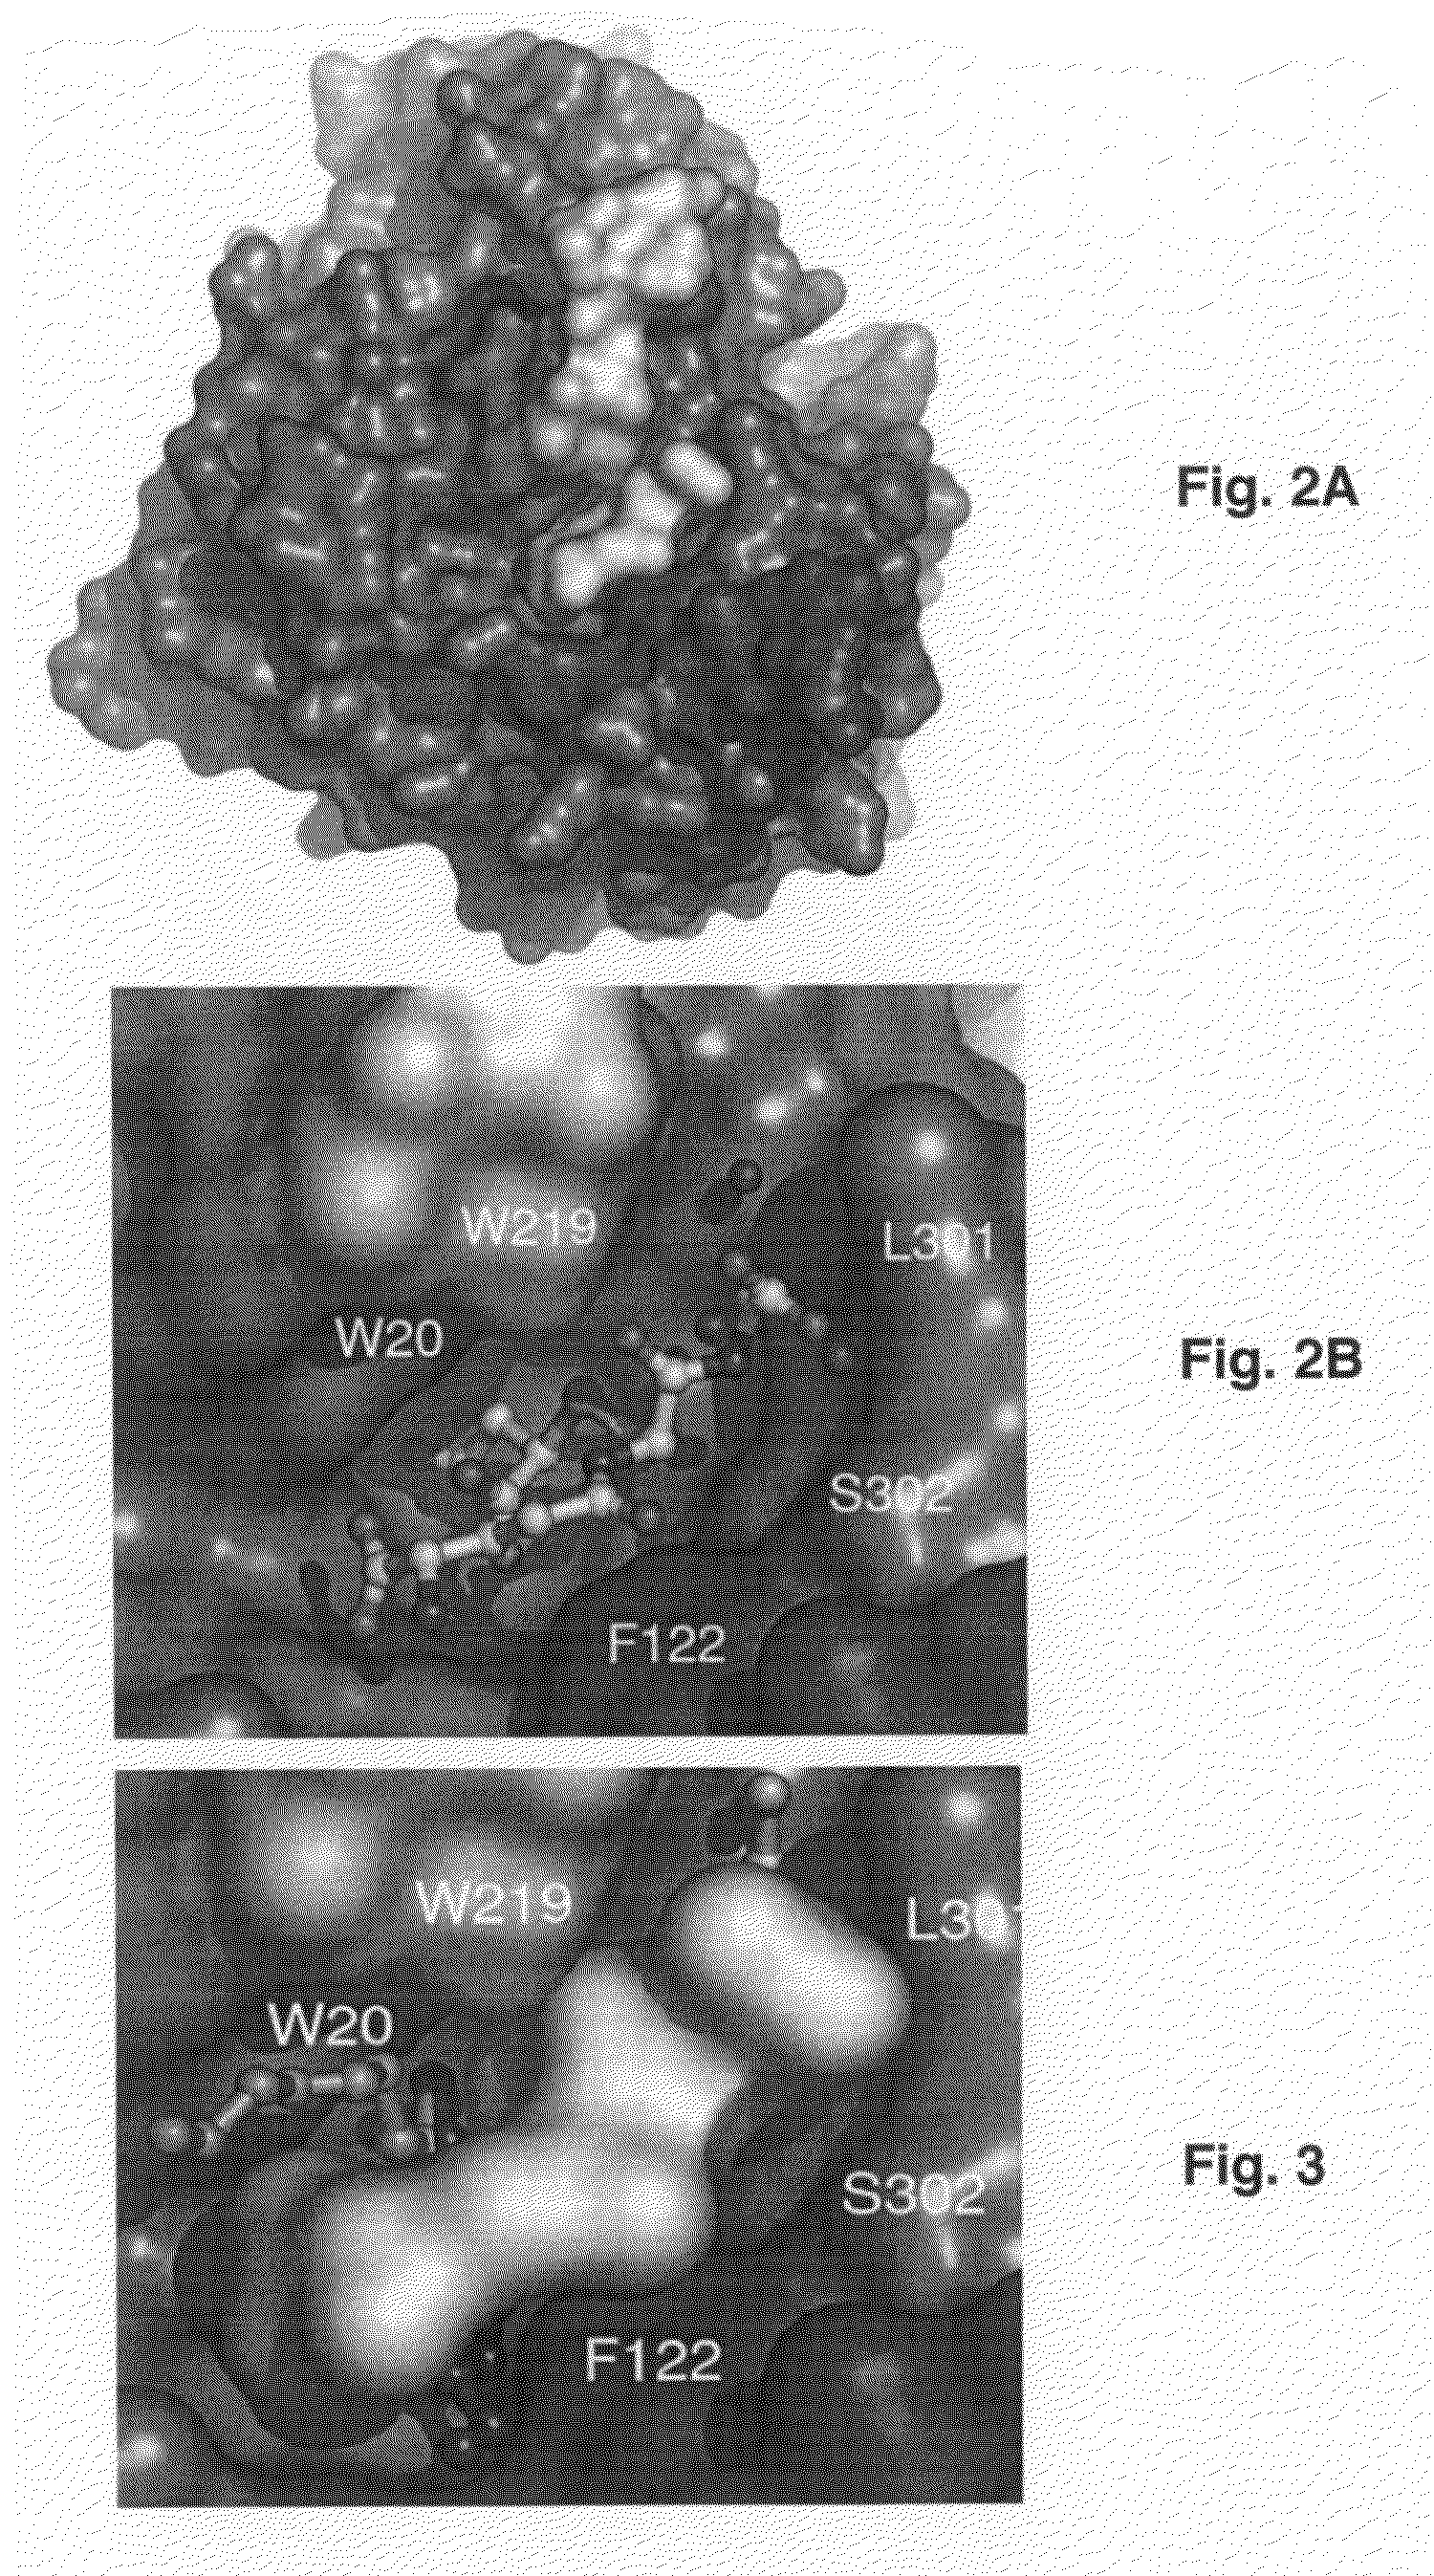 Structural-based inhibitors of the glutathione binding site in aldose reductase, methods of screening therefor and methods of use